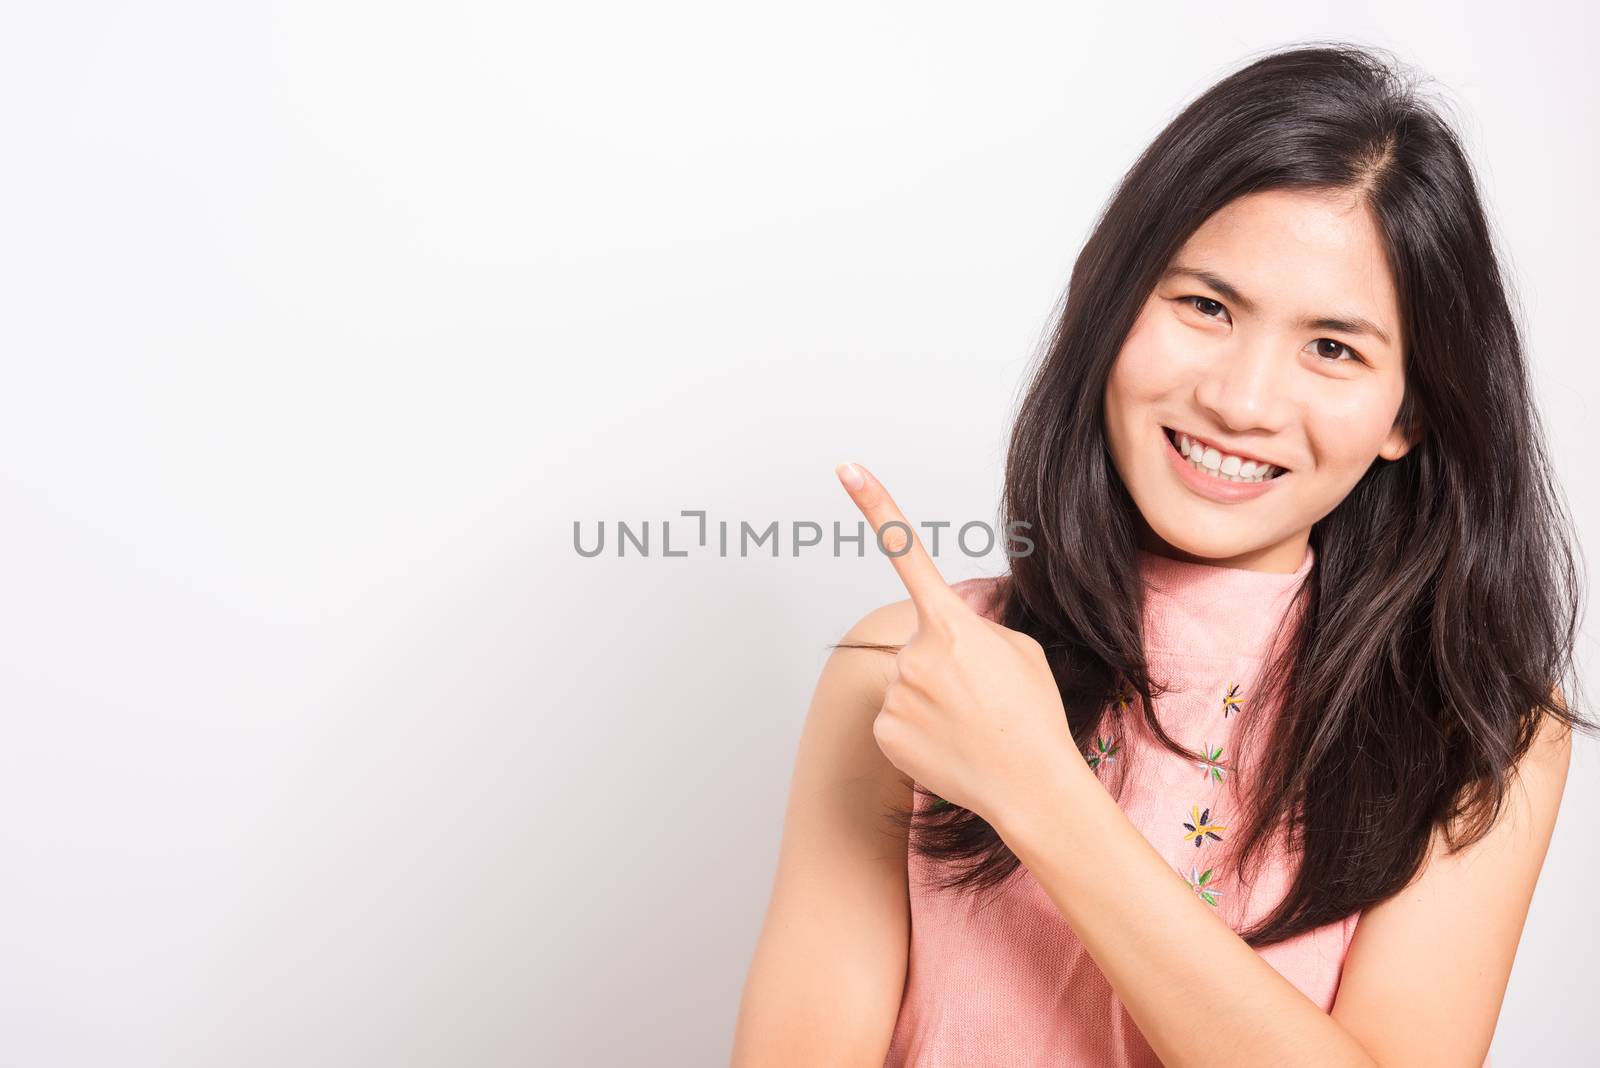 Portrait Asian beautiful young woman standing smile seeing white teeth, She pointing finger up and looking at camera, shoot photo in studio on white background. There was copy space to put text